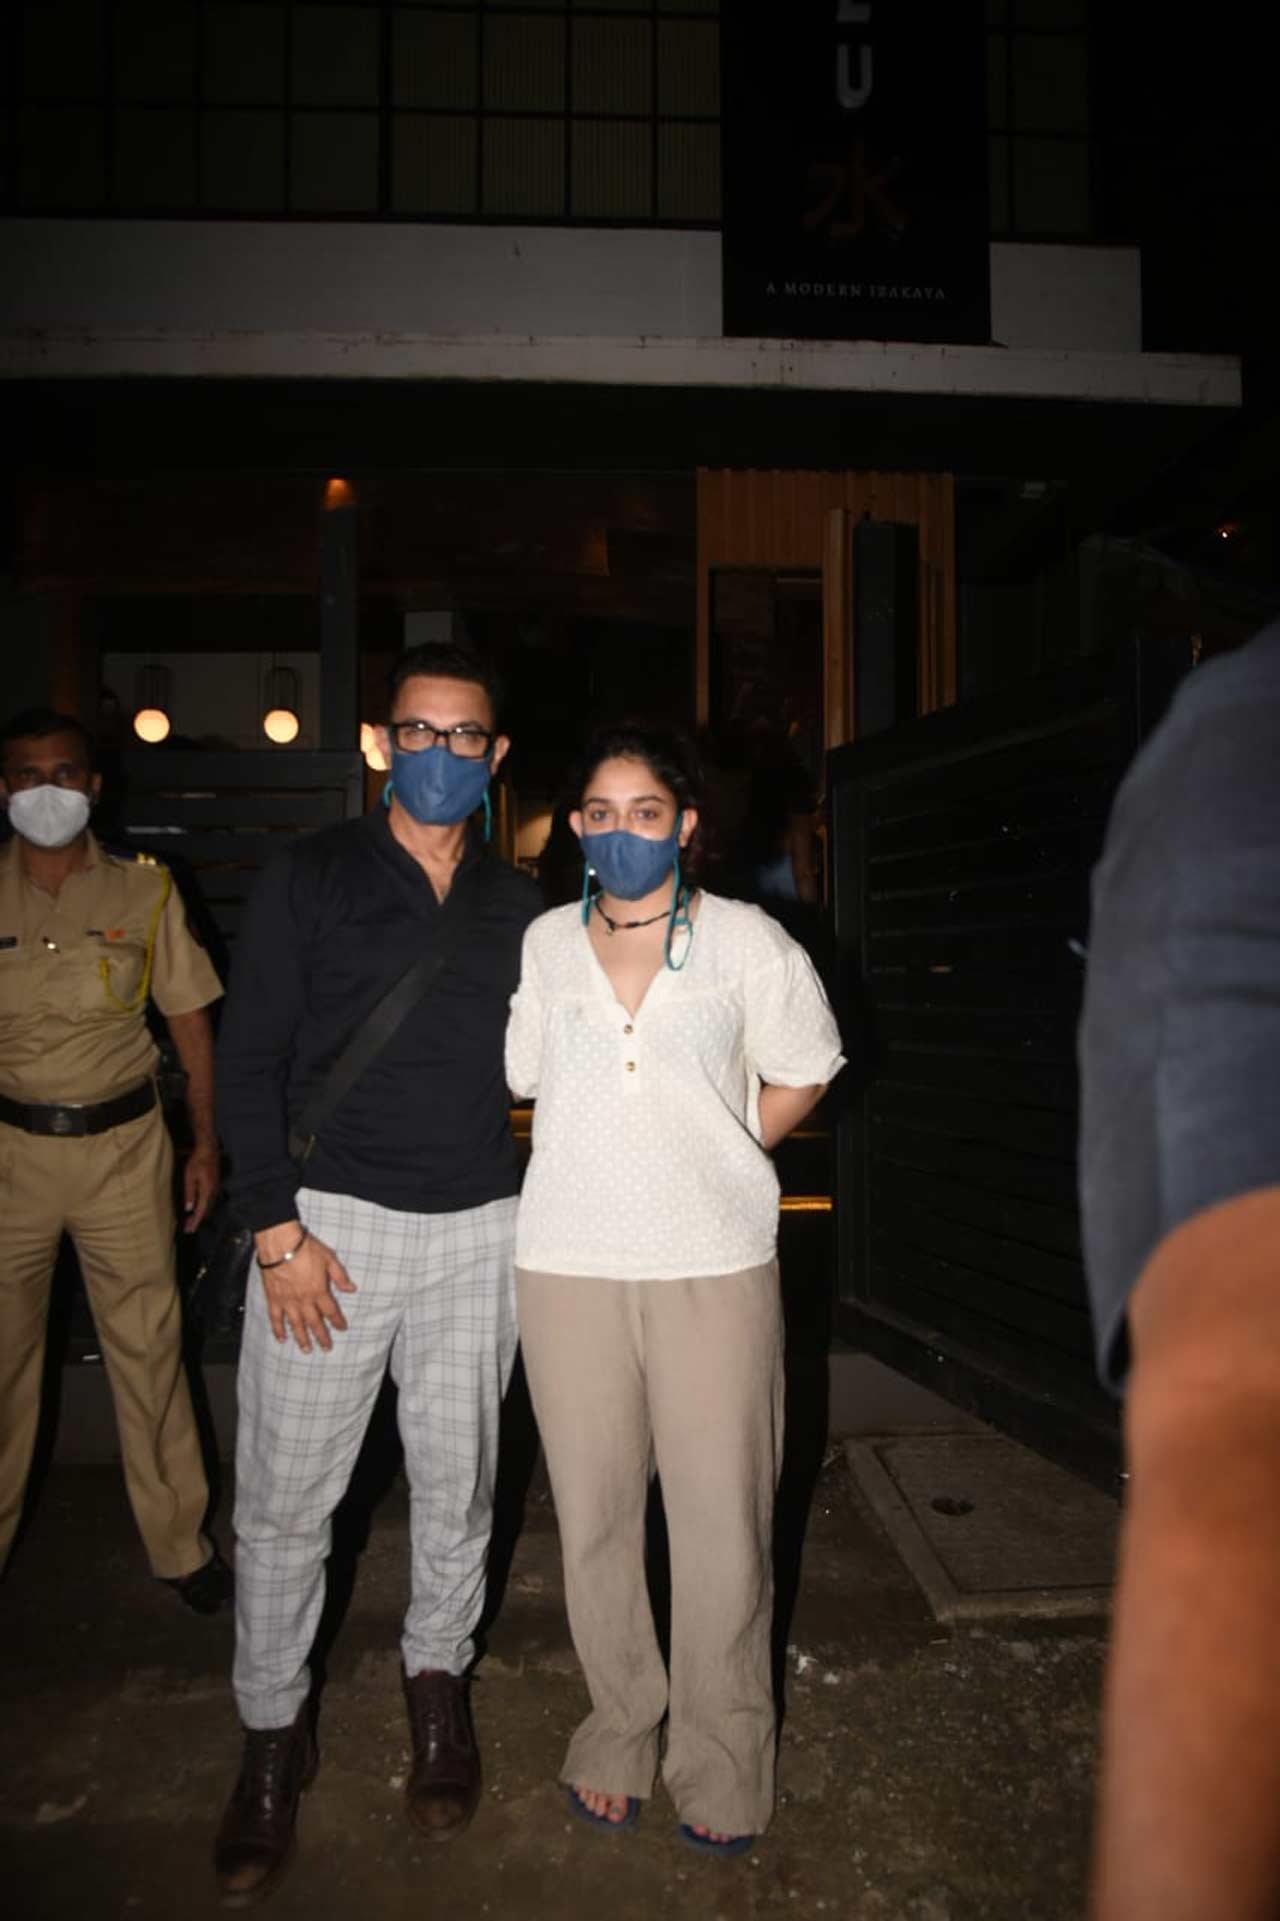 Ira Khan and Aamir Khan were snapped at a Japanese restaurant in Khar, Mumbai. The father-daughter duo had a bonding session over dinner in the city.